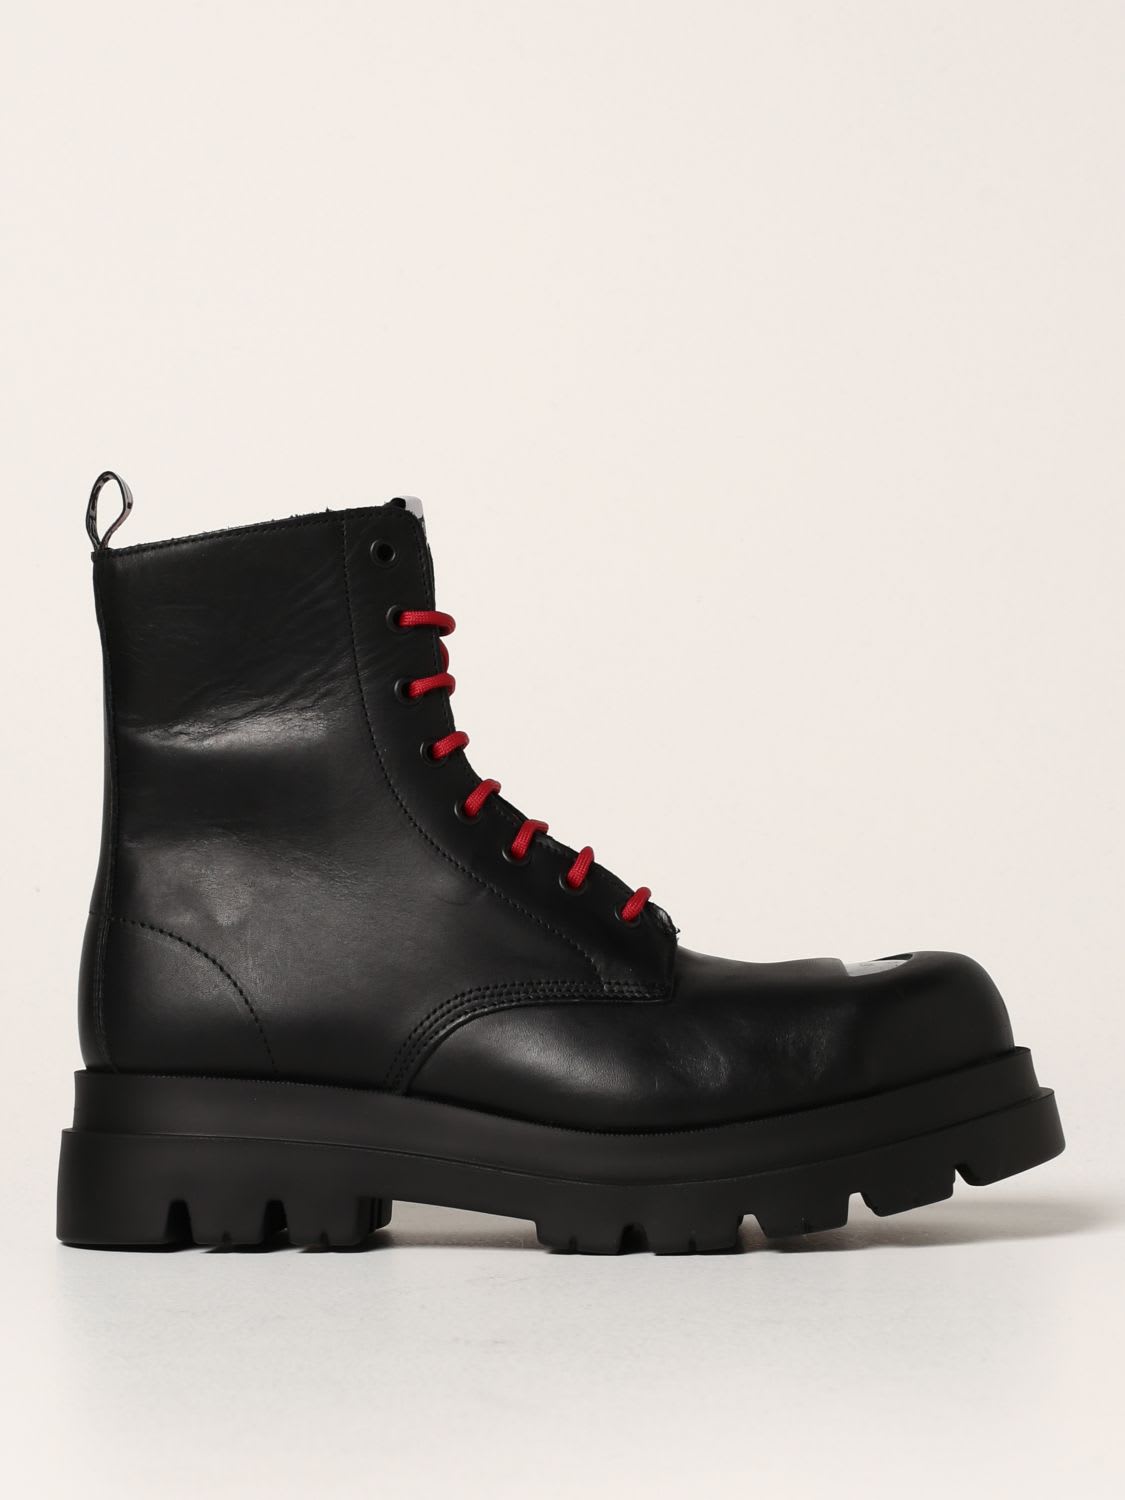 Cult Bolt Boots Cult Bolt Combat Boots In Leather